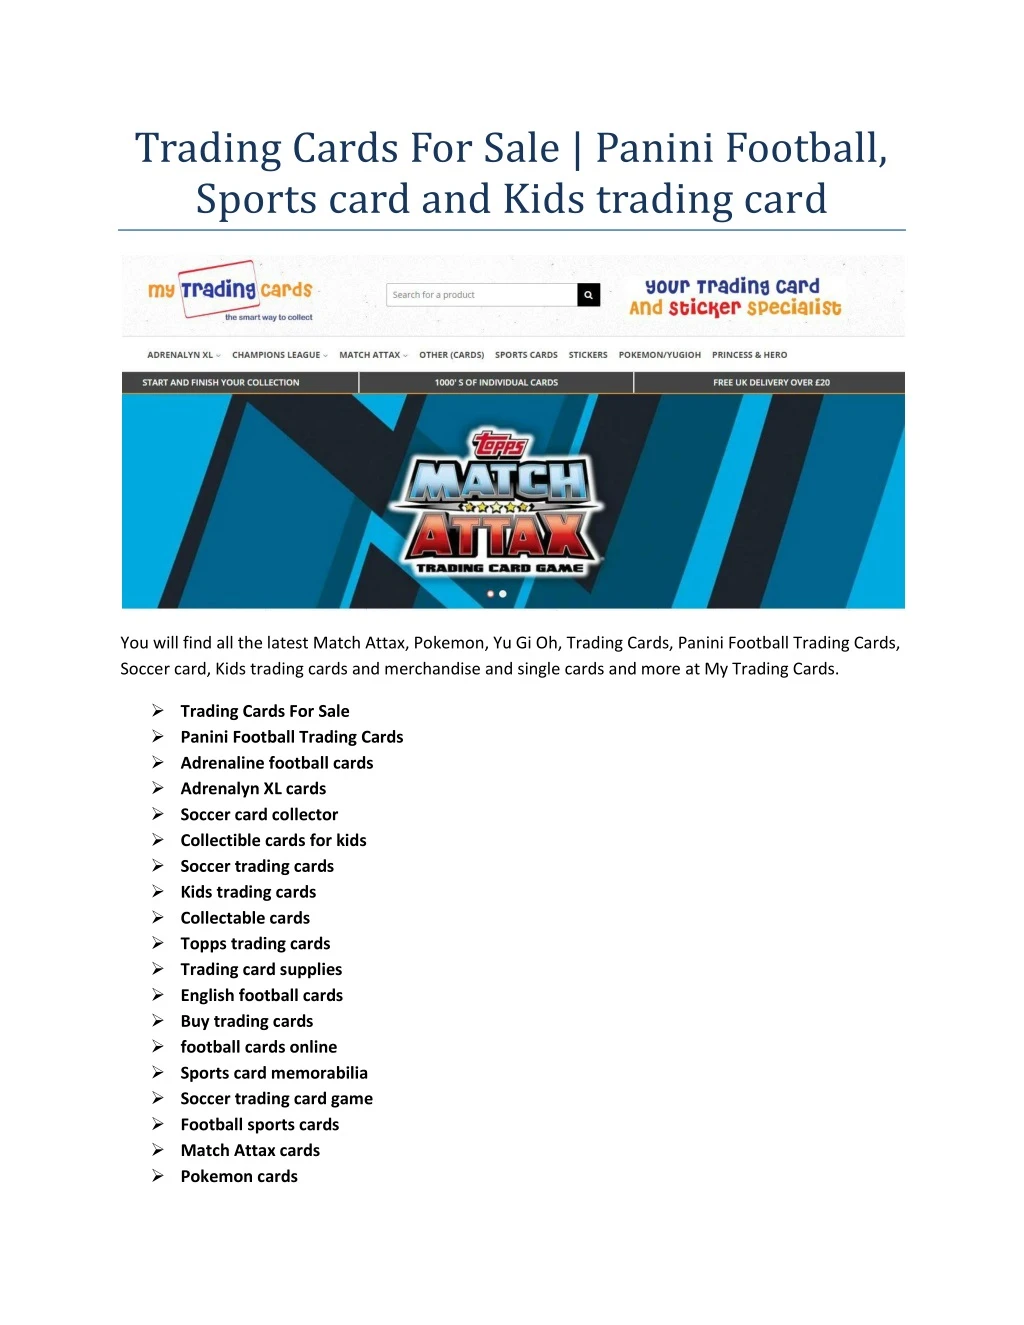 trading cards for sale panini football sports